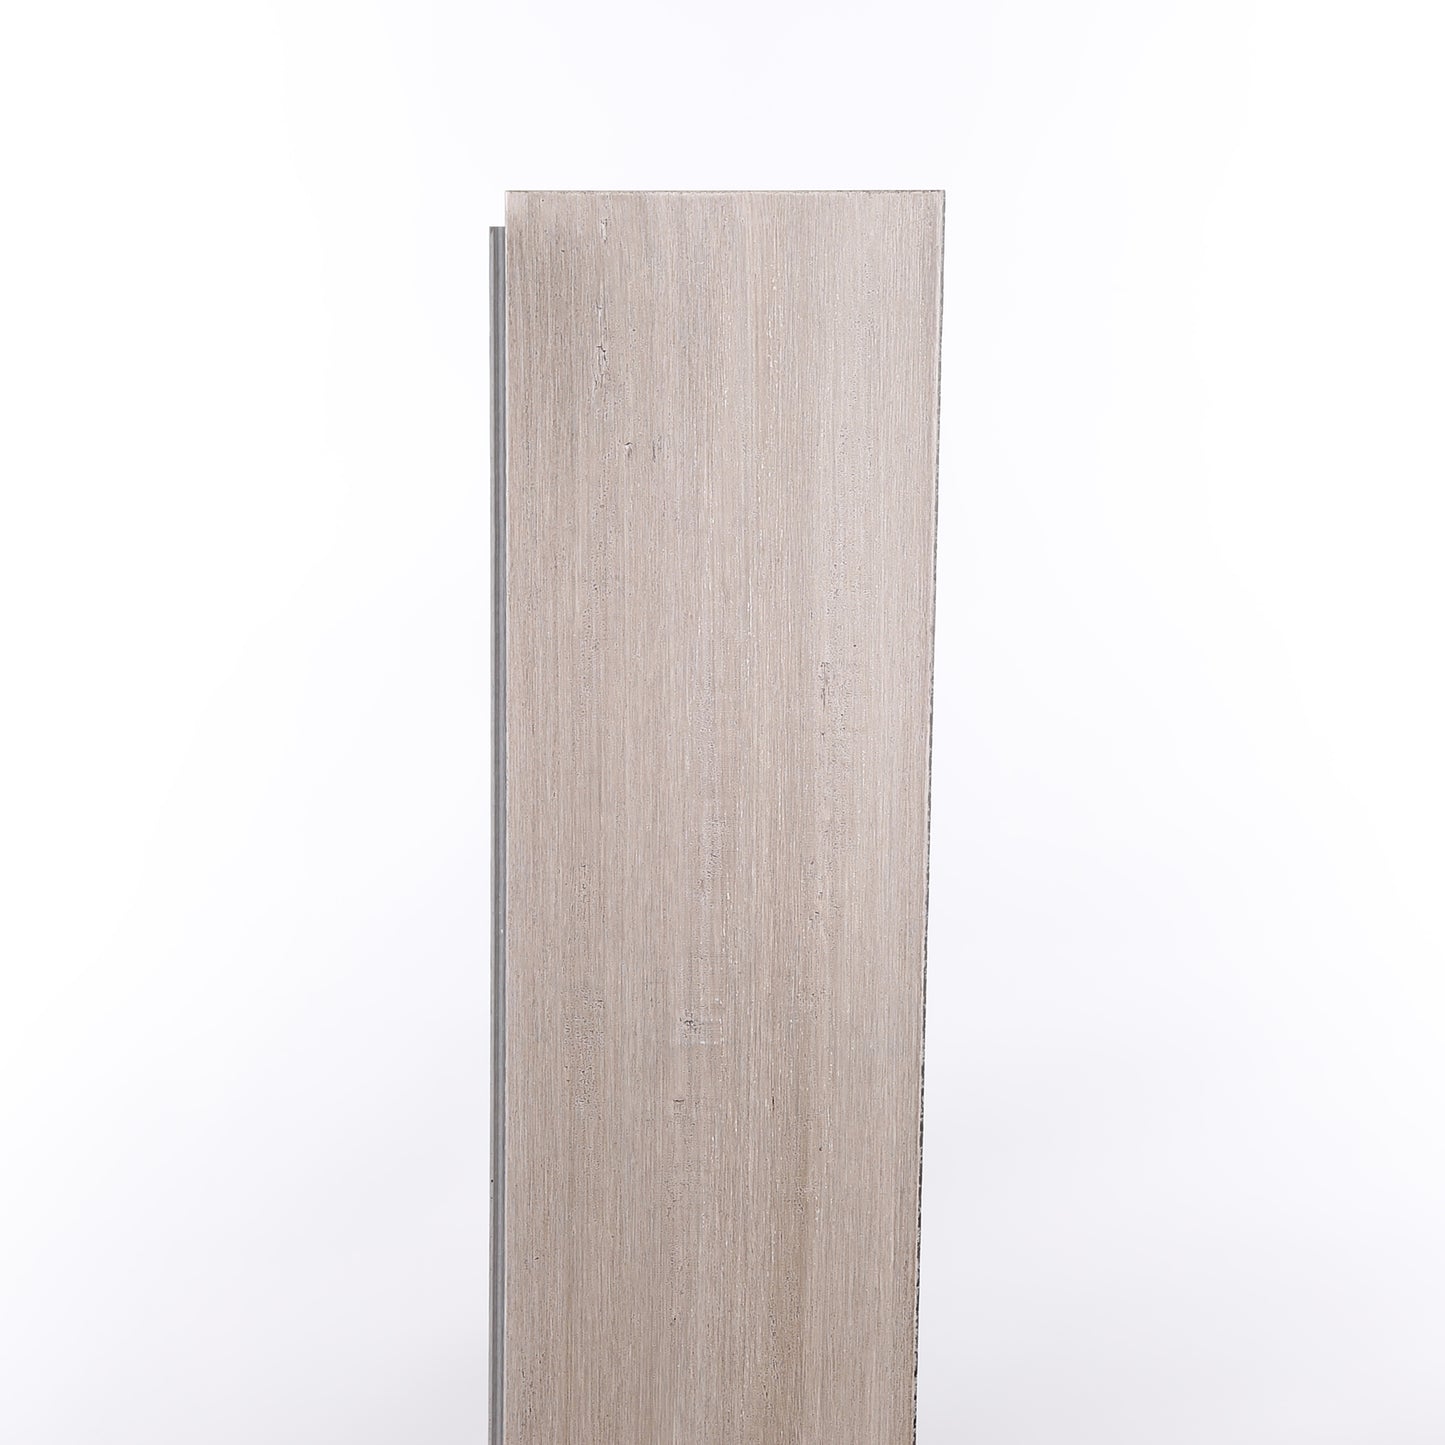 7mm Mixed Gray Waterproof Engineered Strand Bamboo Flooring 5.12 in. Wide x 36.22 in. Long